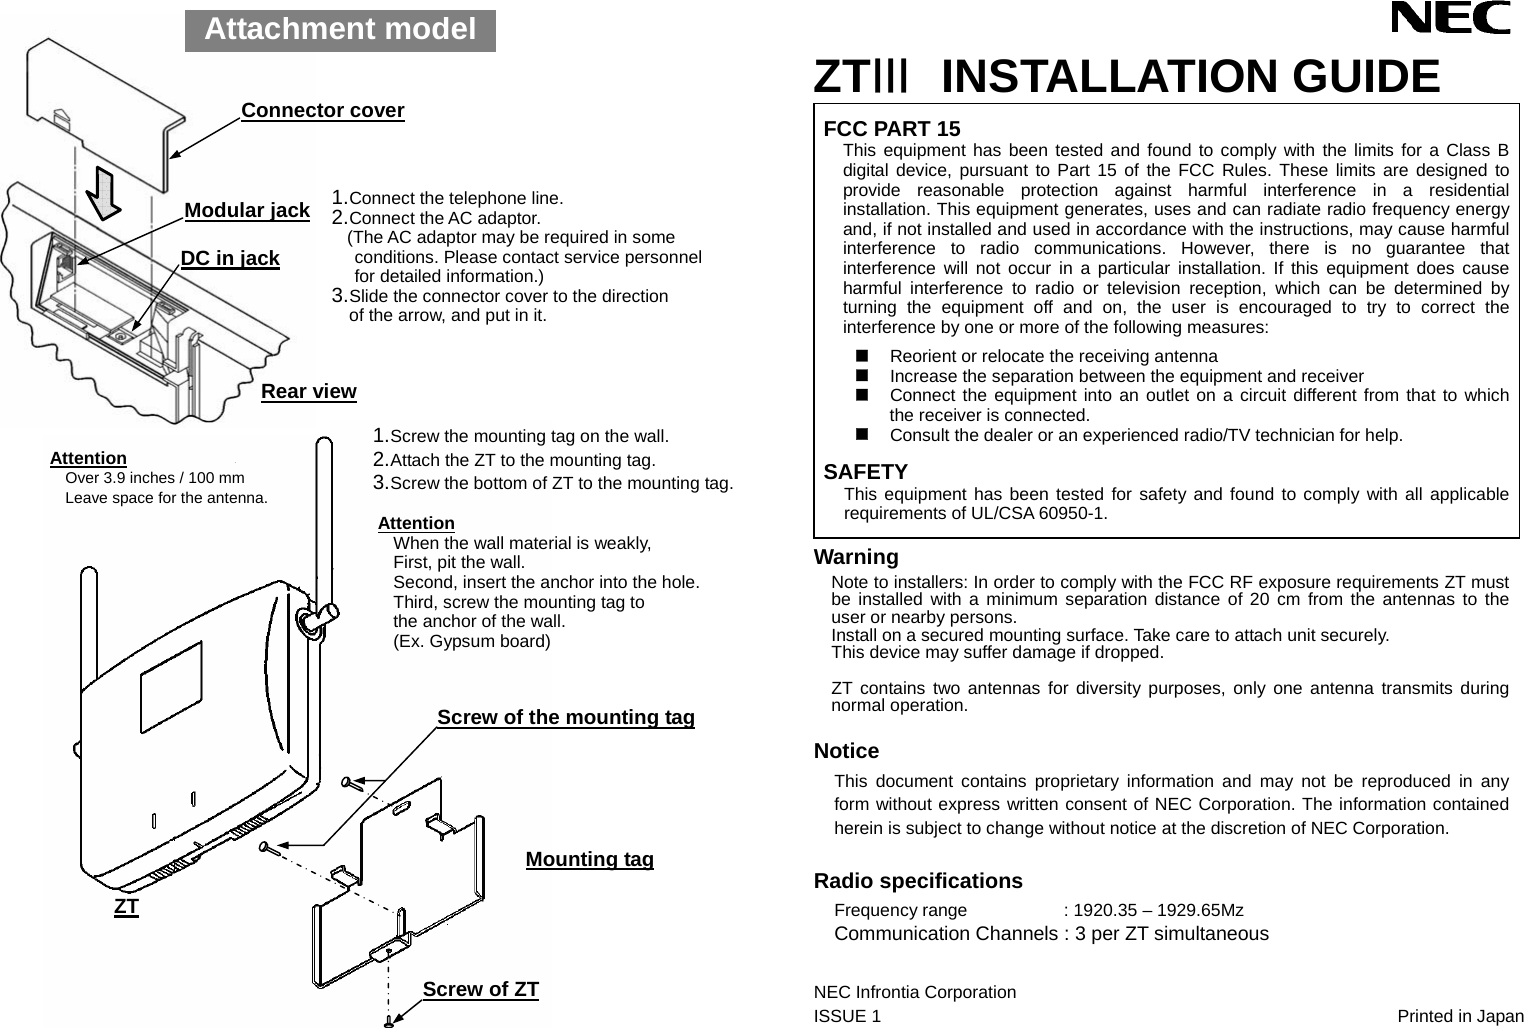                                       ZTⅢ INSTALLATION GUIDE FCC PART 15 This equipment has been tested and found to comply with the limits for a Class B digital device, pursuant to Part 15 of the FCC Rules. These limits are designed to provide reasonable protection against harmful interference in a residential installation. This equipment generates, uses and can radiate radio frequency energy and, if not installed and used in accordance with the instructions, may cause harmful interference to radio communications. However, there is no guarantee that interference will not occur in a particular installation. If this equipment does cause harmful interference to radio or television reception, which can be determined by turning the equipment off and on, the user is encouraged to try to correct the interference by one or more of the following measures:   Reorient or relocate the receiving antenna  Increase the separation between the equipment and receiver  Connect the equipment into an outlet on a circuit different from that to which the receiver is connected.  Consult the dealer or an experienced radio/TV technician for help.  SAFETY This equipment has been tested for safety and found to comply with all applicable requirements of UL/CSA 60950-1. Warning Note to installers: In order to comply with the FCC RF exposure requirements ZT must be installed with a minimum separation distance of 20 cm from the antennas to the user or nearby persons. Install on a secured mounting surface. Take care to attach unit securely. This device may suffer damage if dropped.  ZT contains two antennas for diversity purposes, only one antenna transmits during normal operation.  Notice This document contains proprietary information and may not be reproduced in any form without express written consent of NEC Corporation. The information contained herein is subject to change without notice at the discretion of NEC Corporation.  Radio specifications Frequency range     : 1920.35 – 1929.65Mz Communication Channels : 3 per ZT simultaneous  NEC Infrontia Corporation       ISSUE 1       Printed in Japan  1. Connect the telephone line. 2. Connect the AC adaptor. (The AC adaptor may be required in some conditions. Please contact service personnel for detailed information.) 3. Slide the connector cover to the direction     of the arrow, and put in it. Connector cover Modular jack Rear view Attention Over 3.9 inches / 100 mm Leave space for the antenna. Screw of ZT Screw of the mounting tag Mounting tag ZT DC in jack 1. Screw the mounting tag on the wall. 2. Attach the ZT to the mounting tag. 3. Screw the bottom of ZT to the mounting tag.  Attention When the wall material is weakly, First, pit the wall. Second, insert the anchor into the hole. Third, screw the mounting tag to the anchor of the wall. (Ex. Gypsum board)  Attachment model